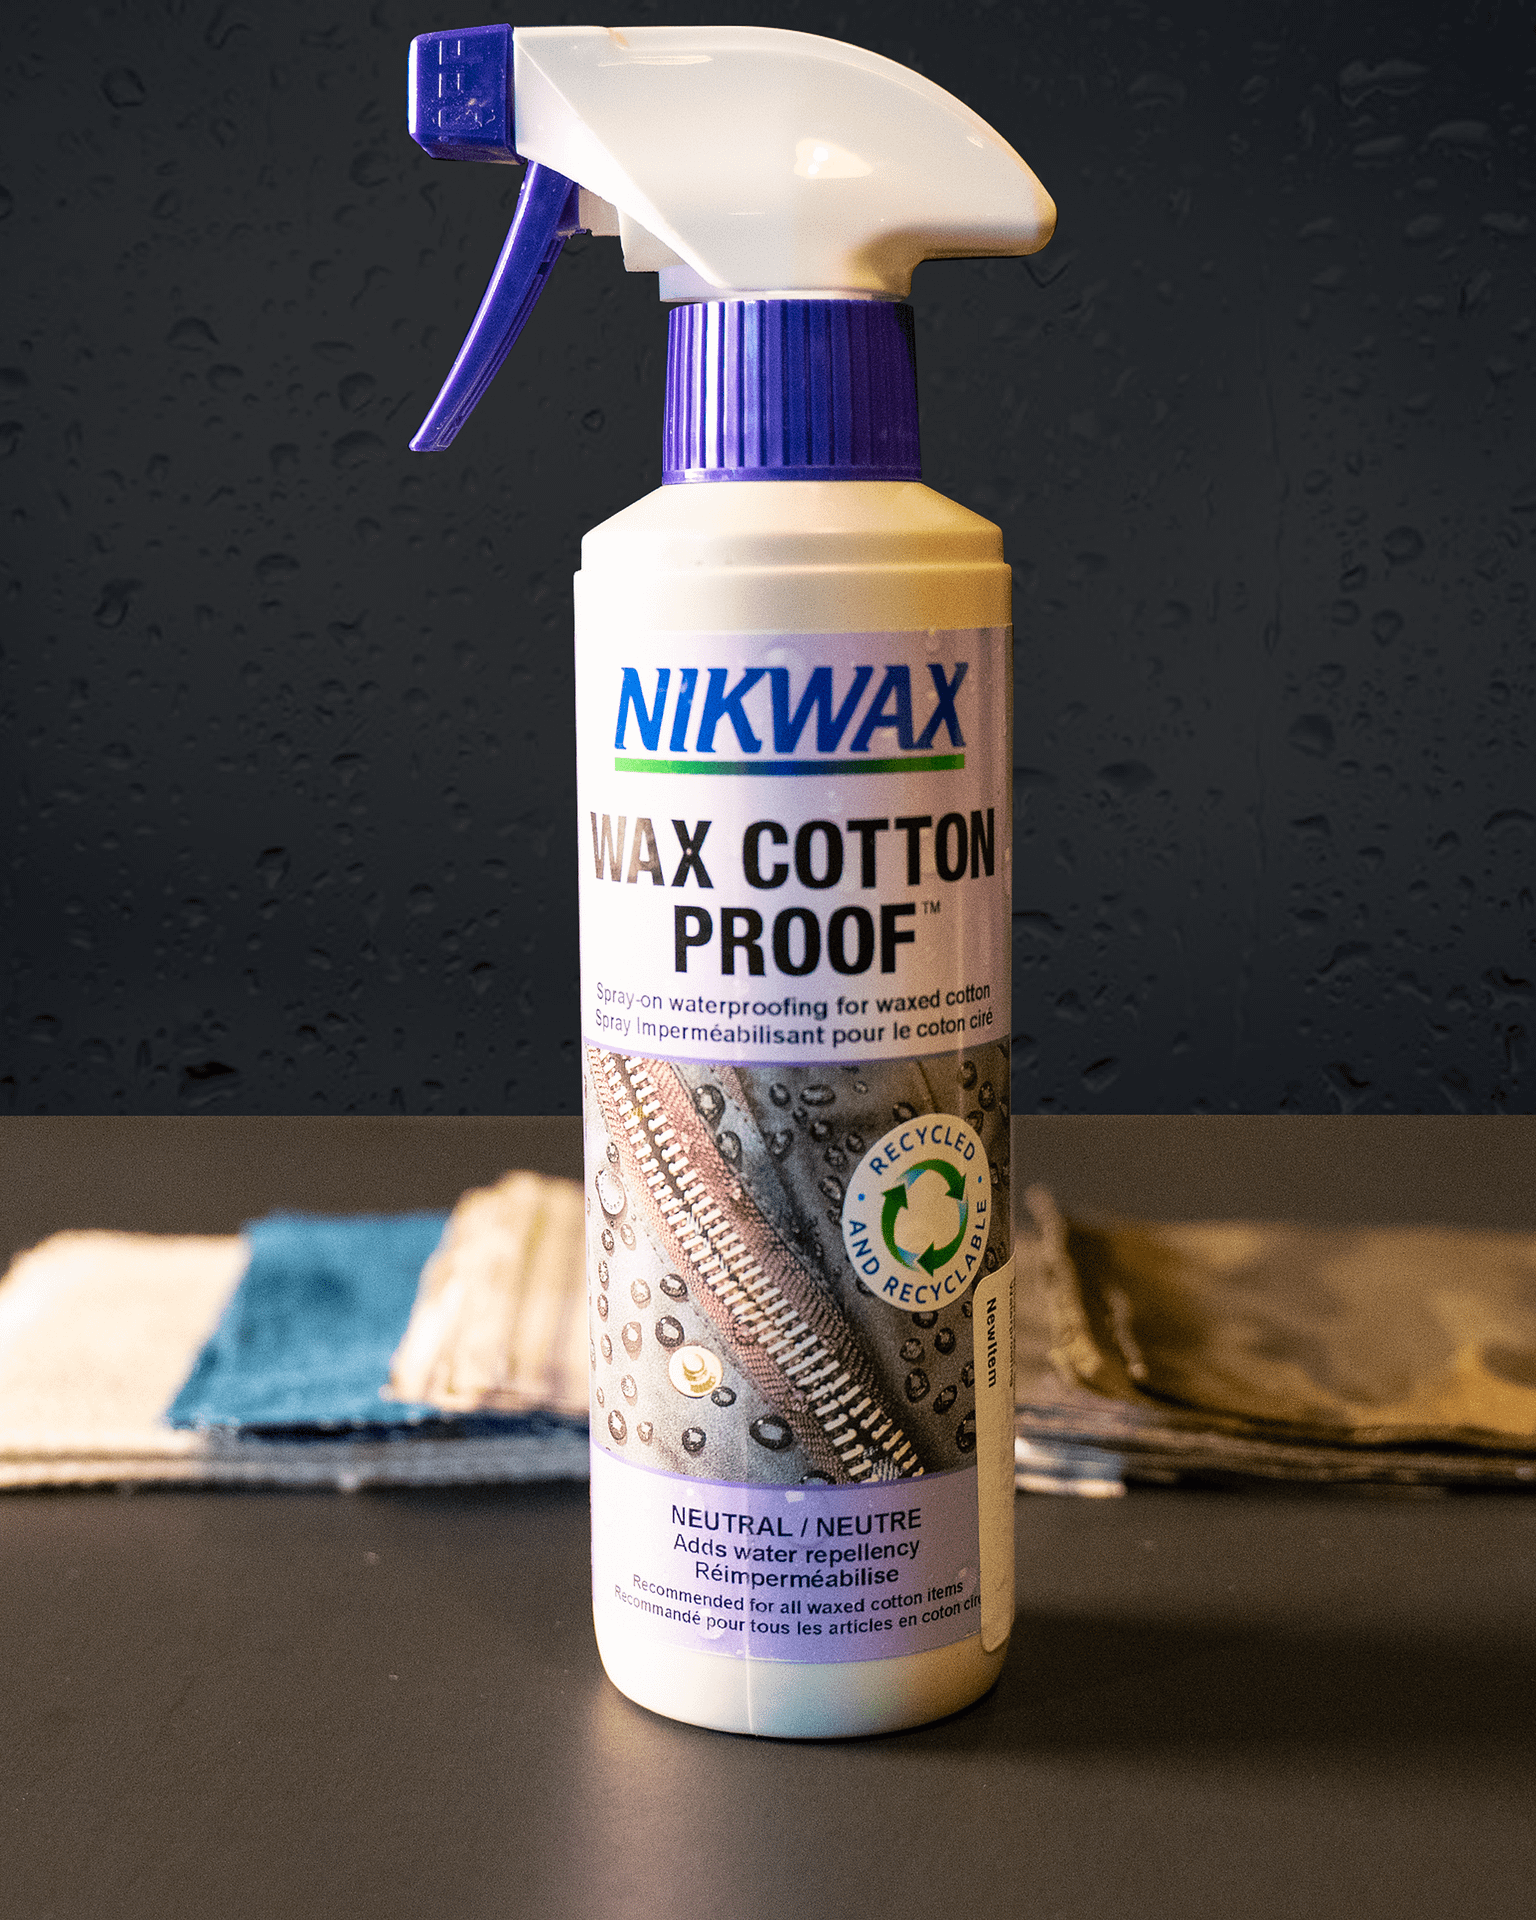 Nikwax Cotton Proofer Product Image